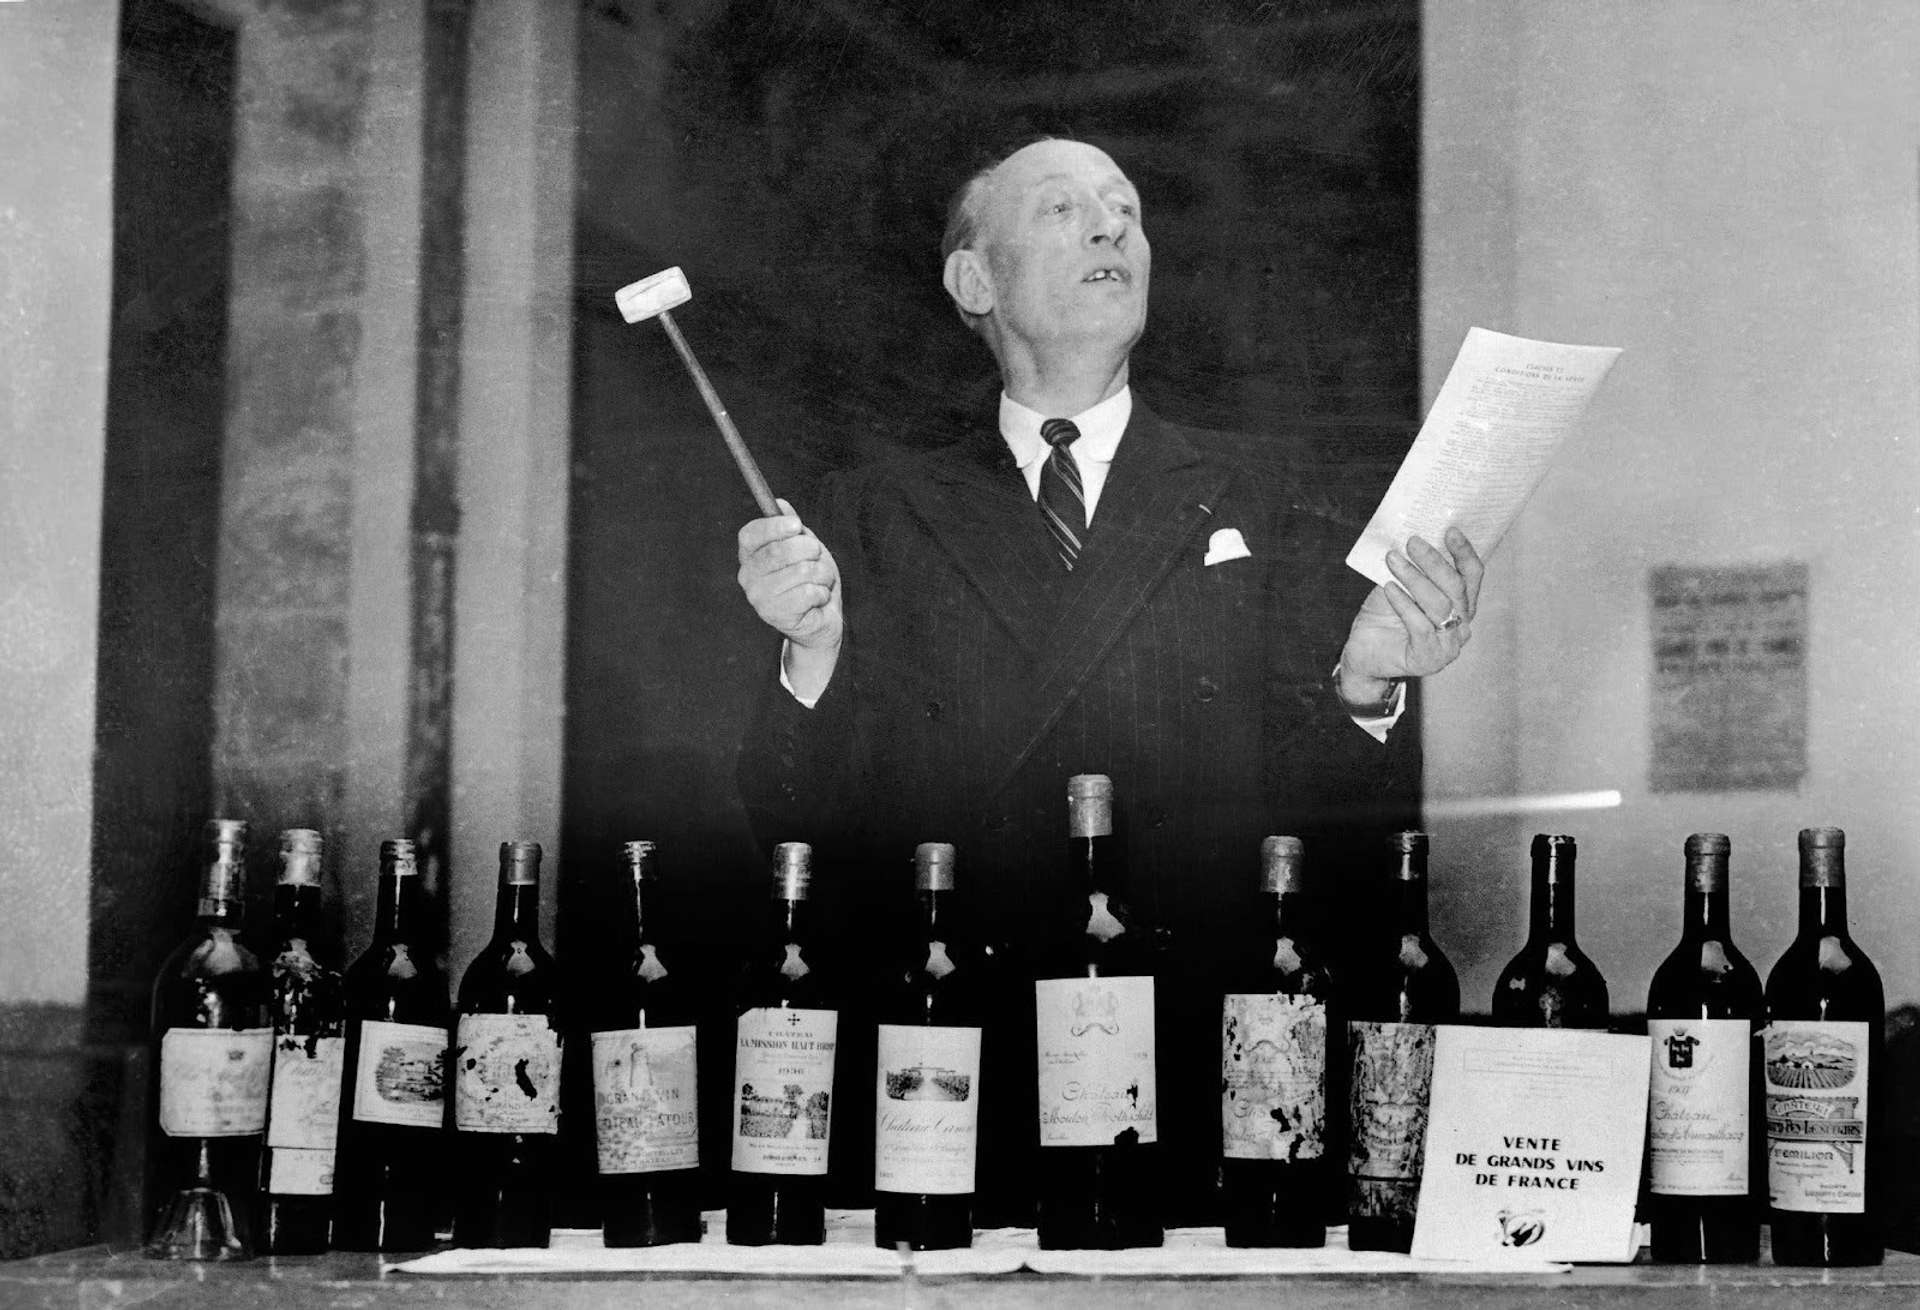 Black and white image of a male auctioneer speaking out to the room with a row of wines in front of him holding a gavel in one hand and a paper sheet in the other